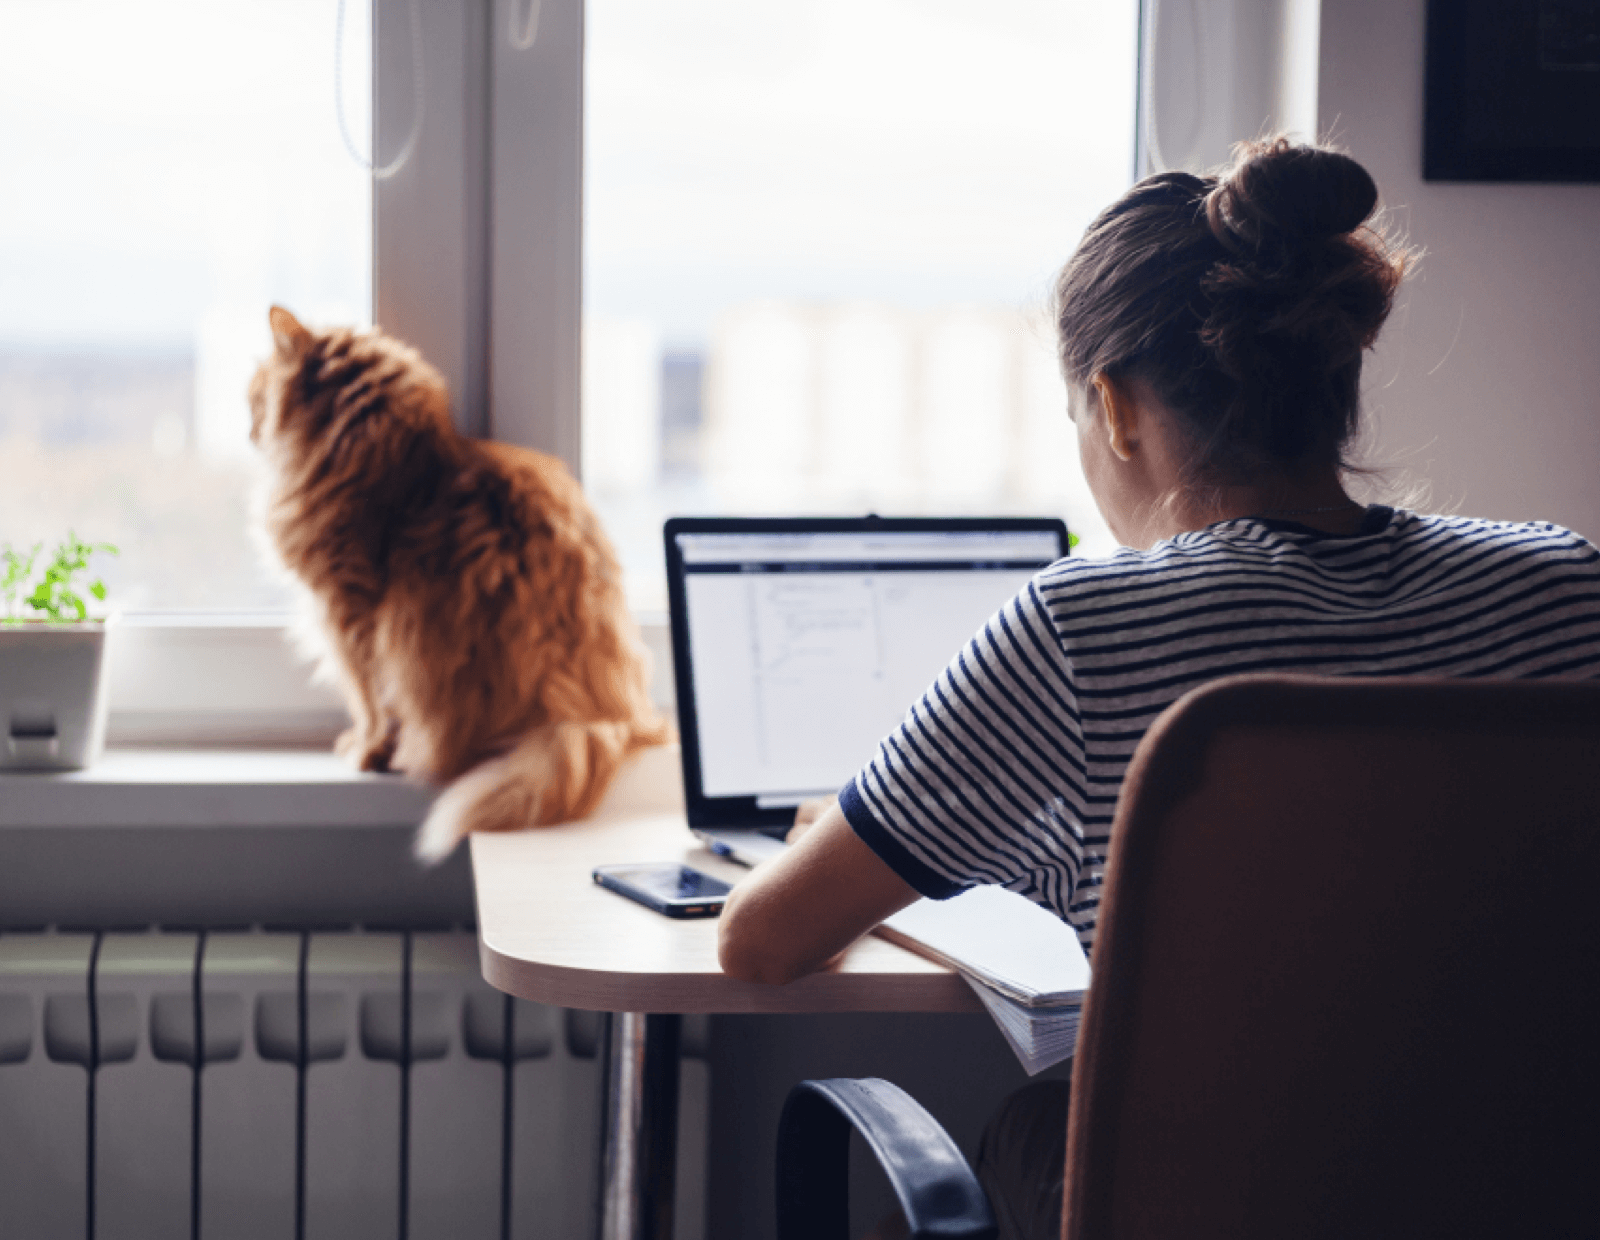 Will one-third of global pet care sales move online by 2026?